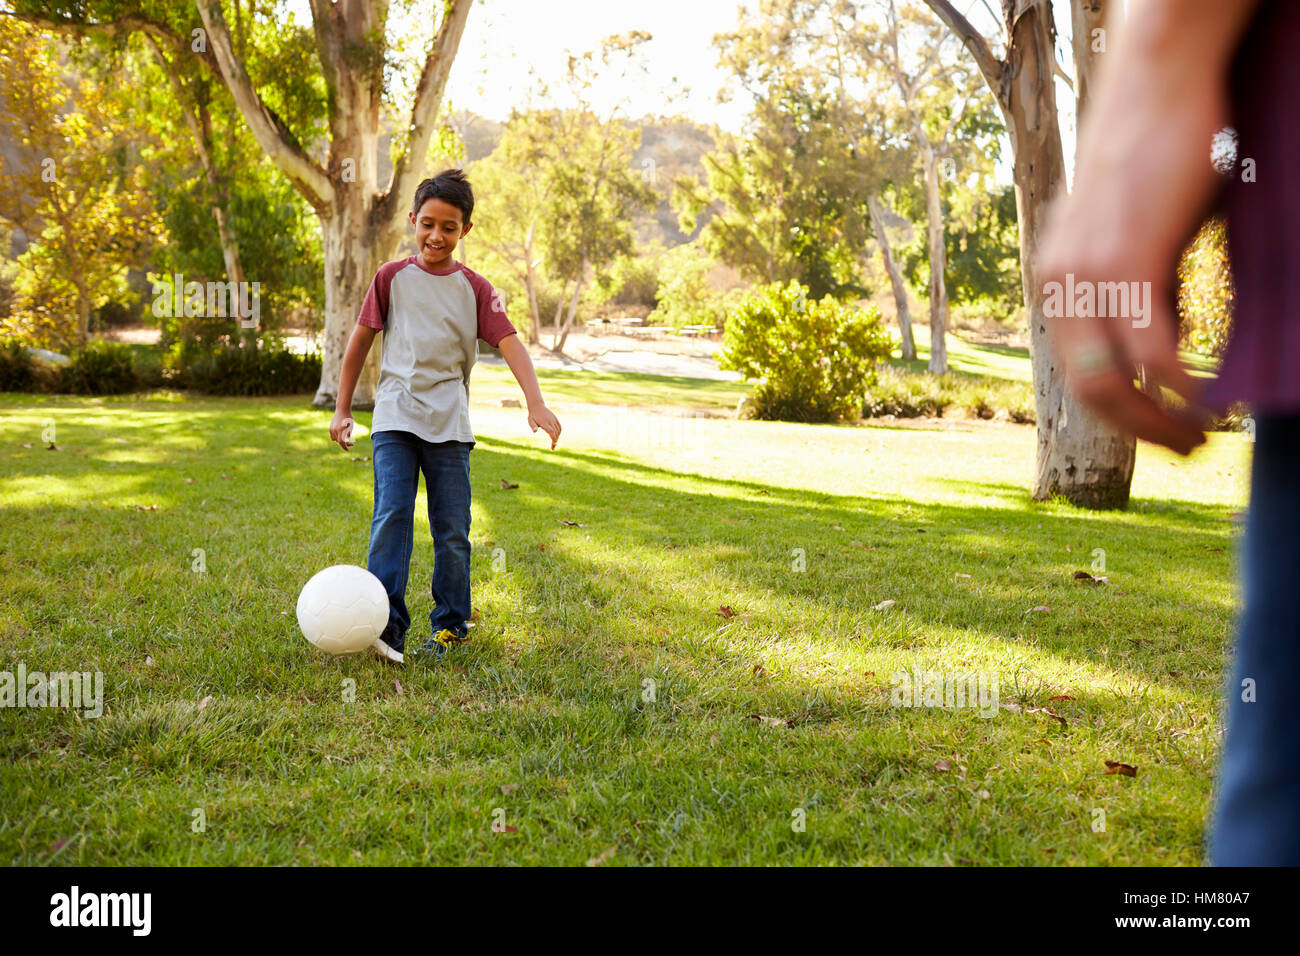 Seven year old boy playing football in a park with dad Stock Photo